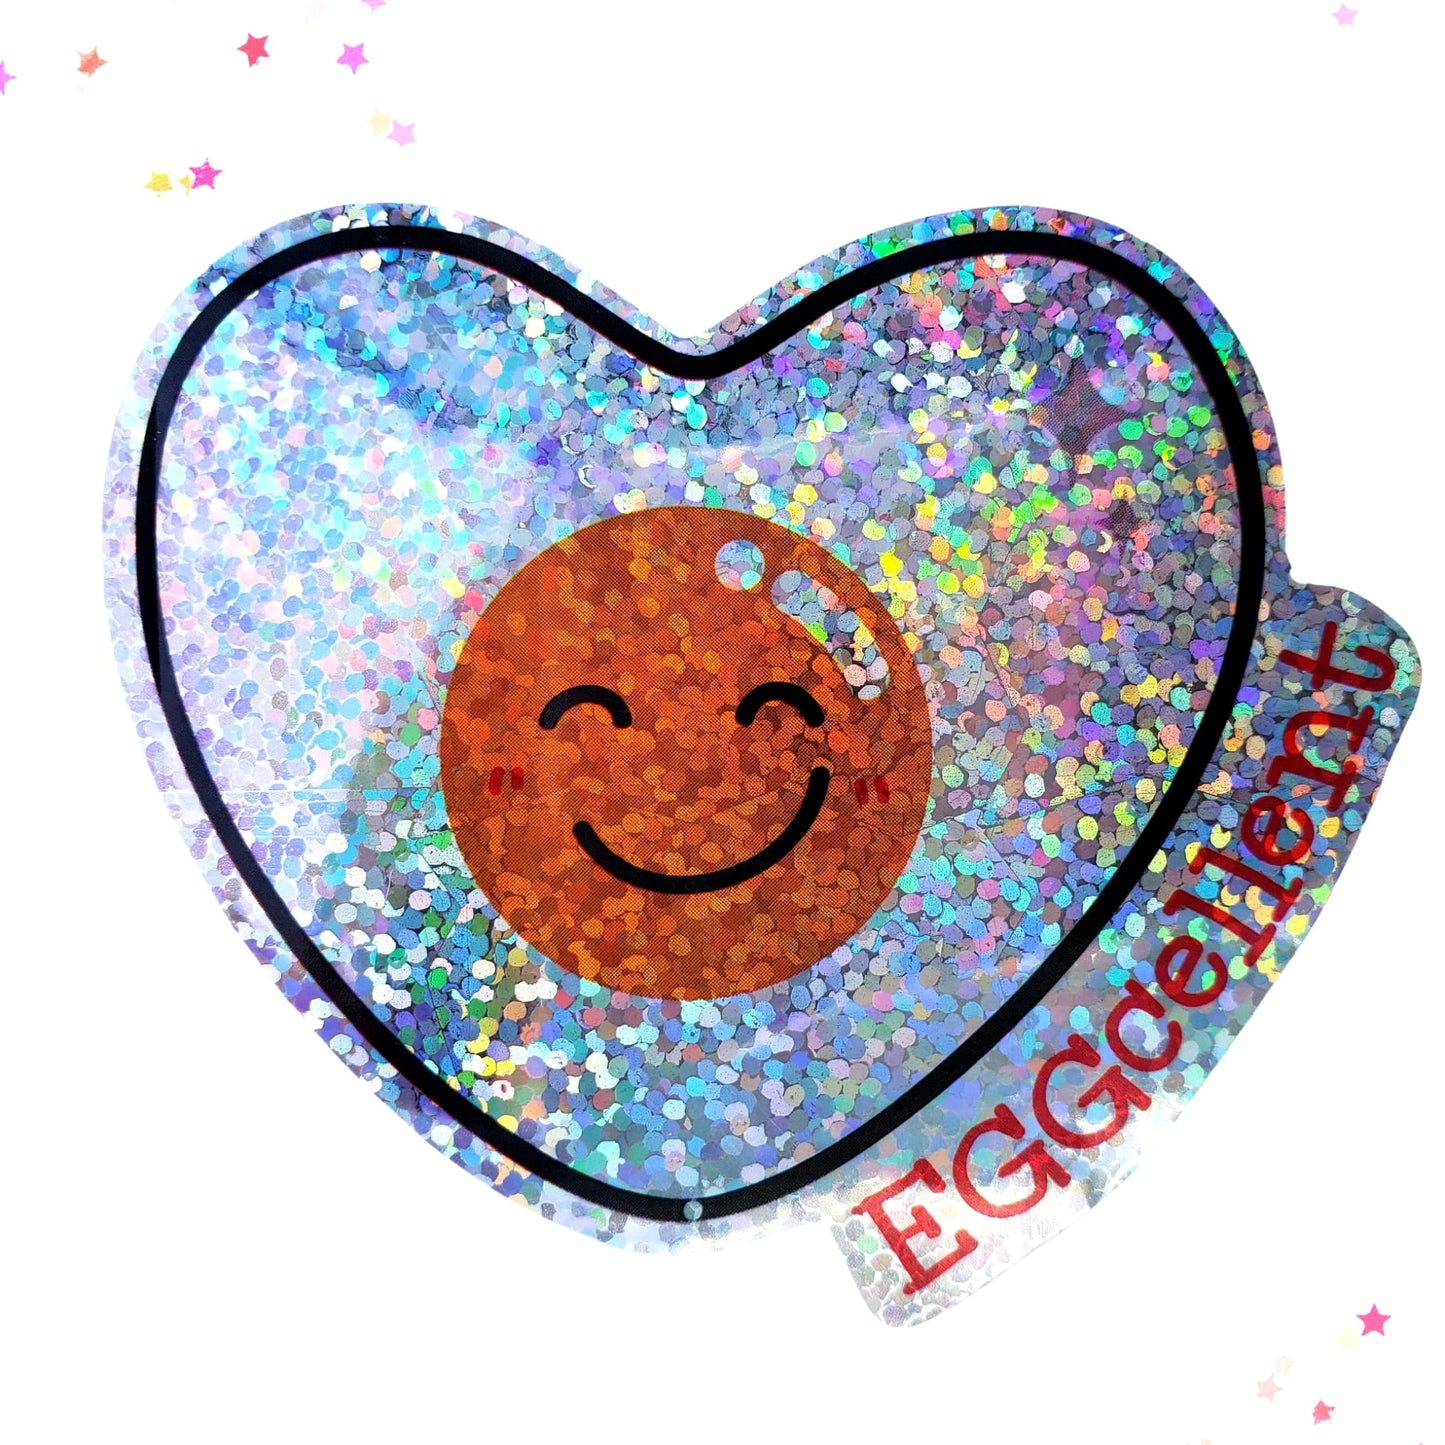 Premium Sticker - Sparkly Holographic Glitter Eggcellent Heart-Shaped Egg from Confetti Kitty, Only 2.00